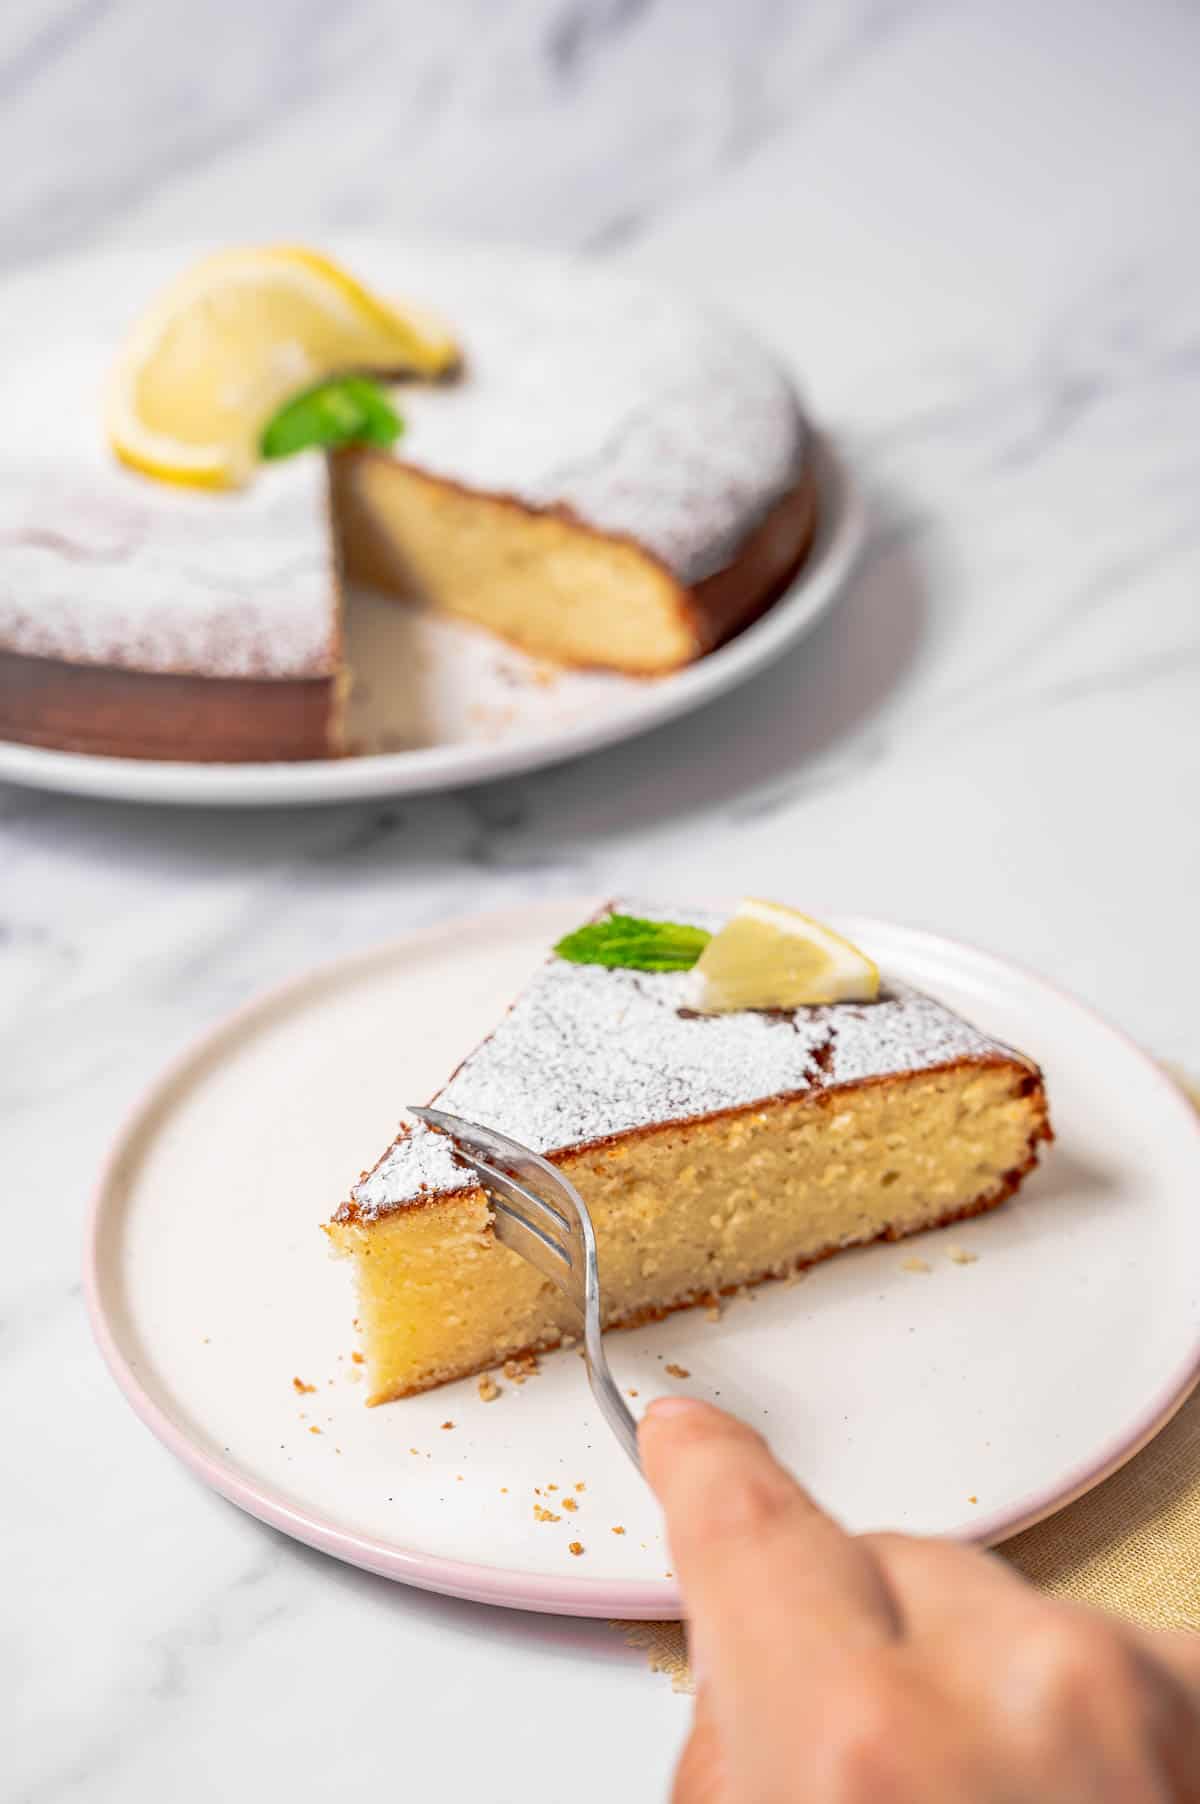 Cutting into a slice of lemon olive oil cake on a white plate